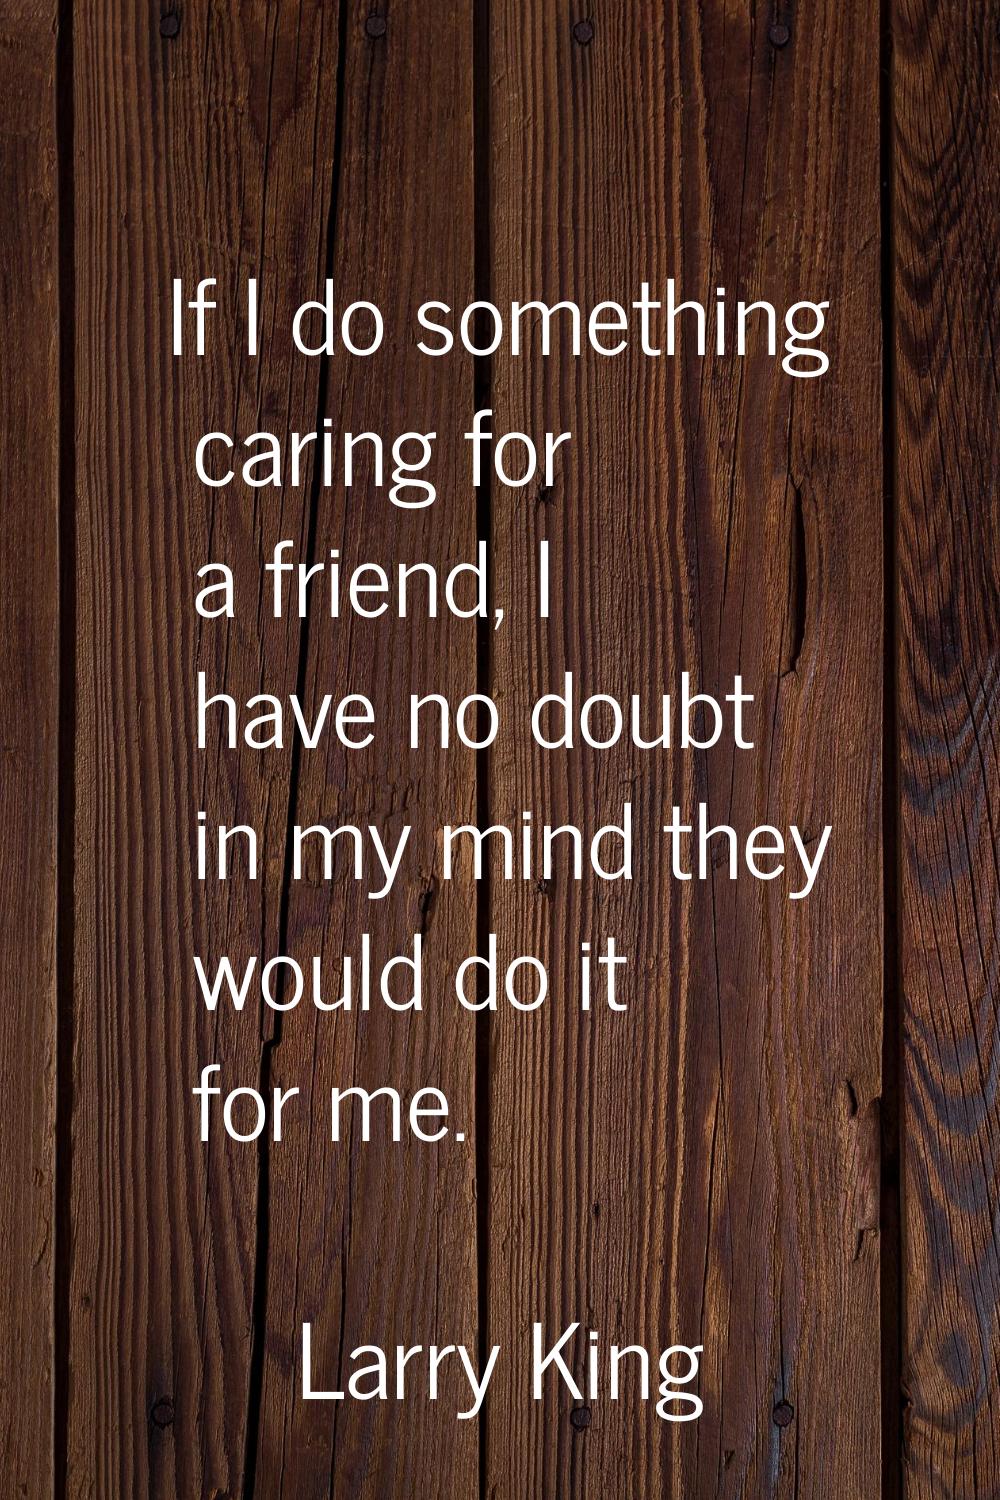 If I do something caring for a friend, I have no doubt in my mind they would do it for me.